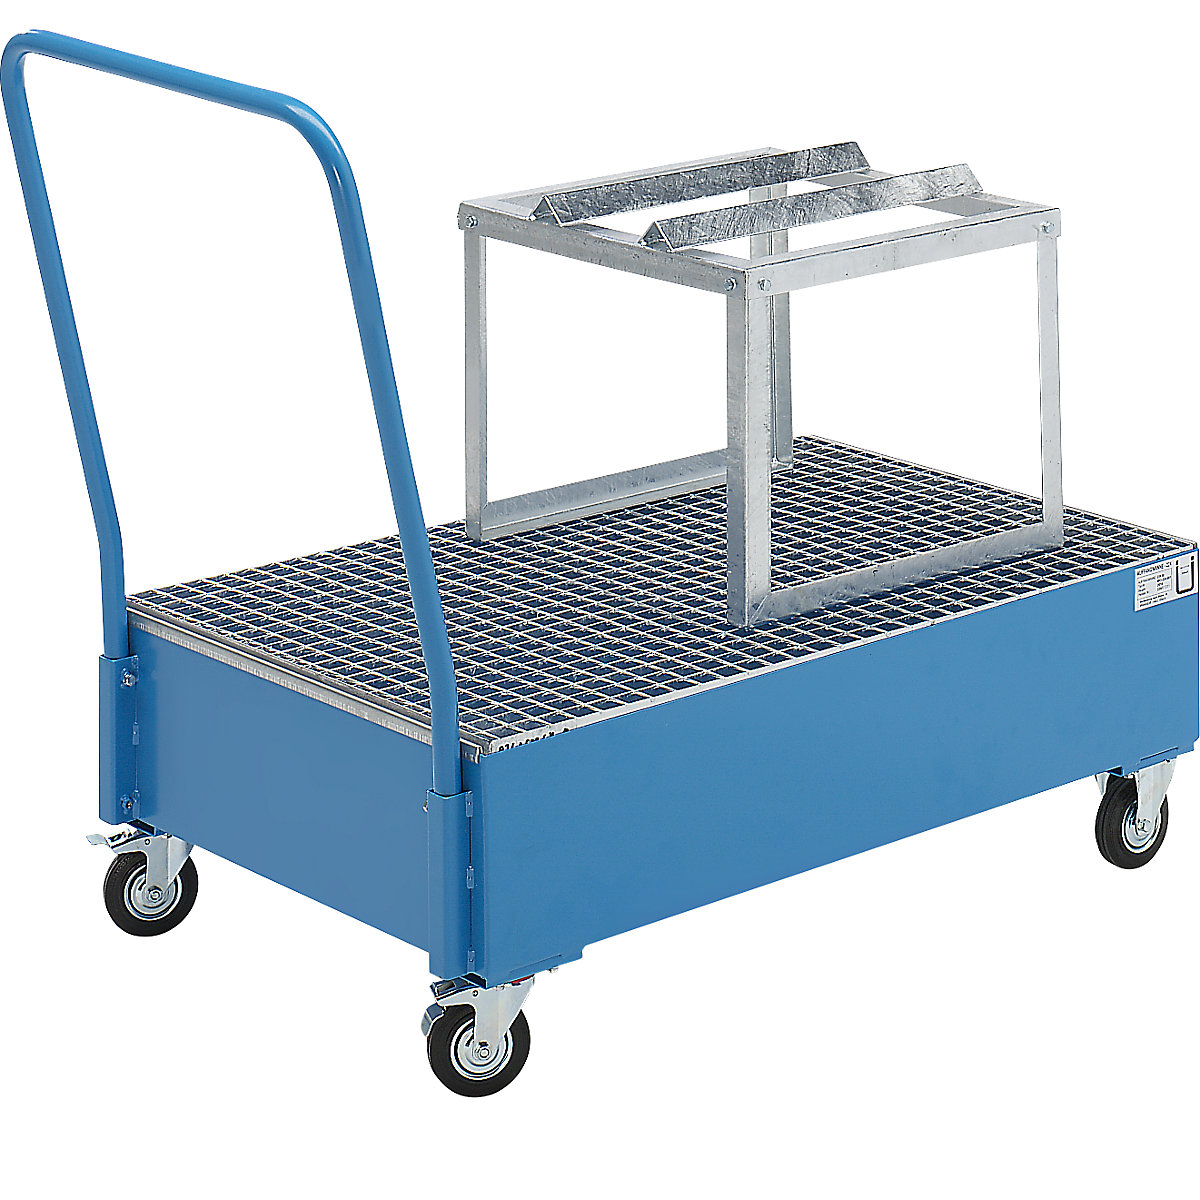 Mobile sump tray made of sheet steel – eurokraft basic, LxW 1200 x 800 mm, 1 x 200 l horizontal drum, blue RAL 5012-4